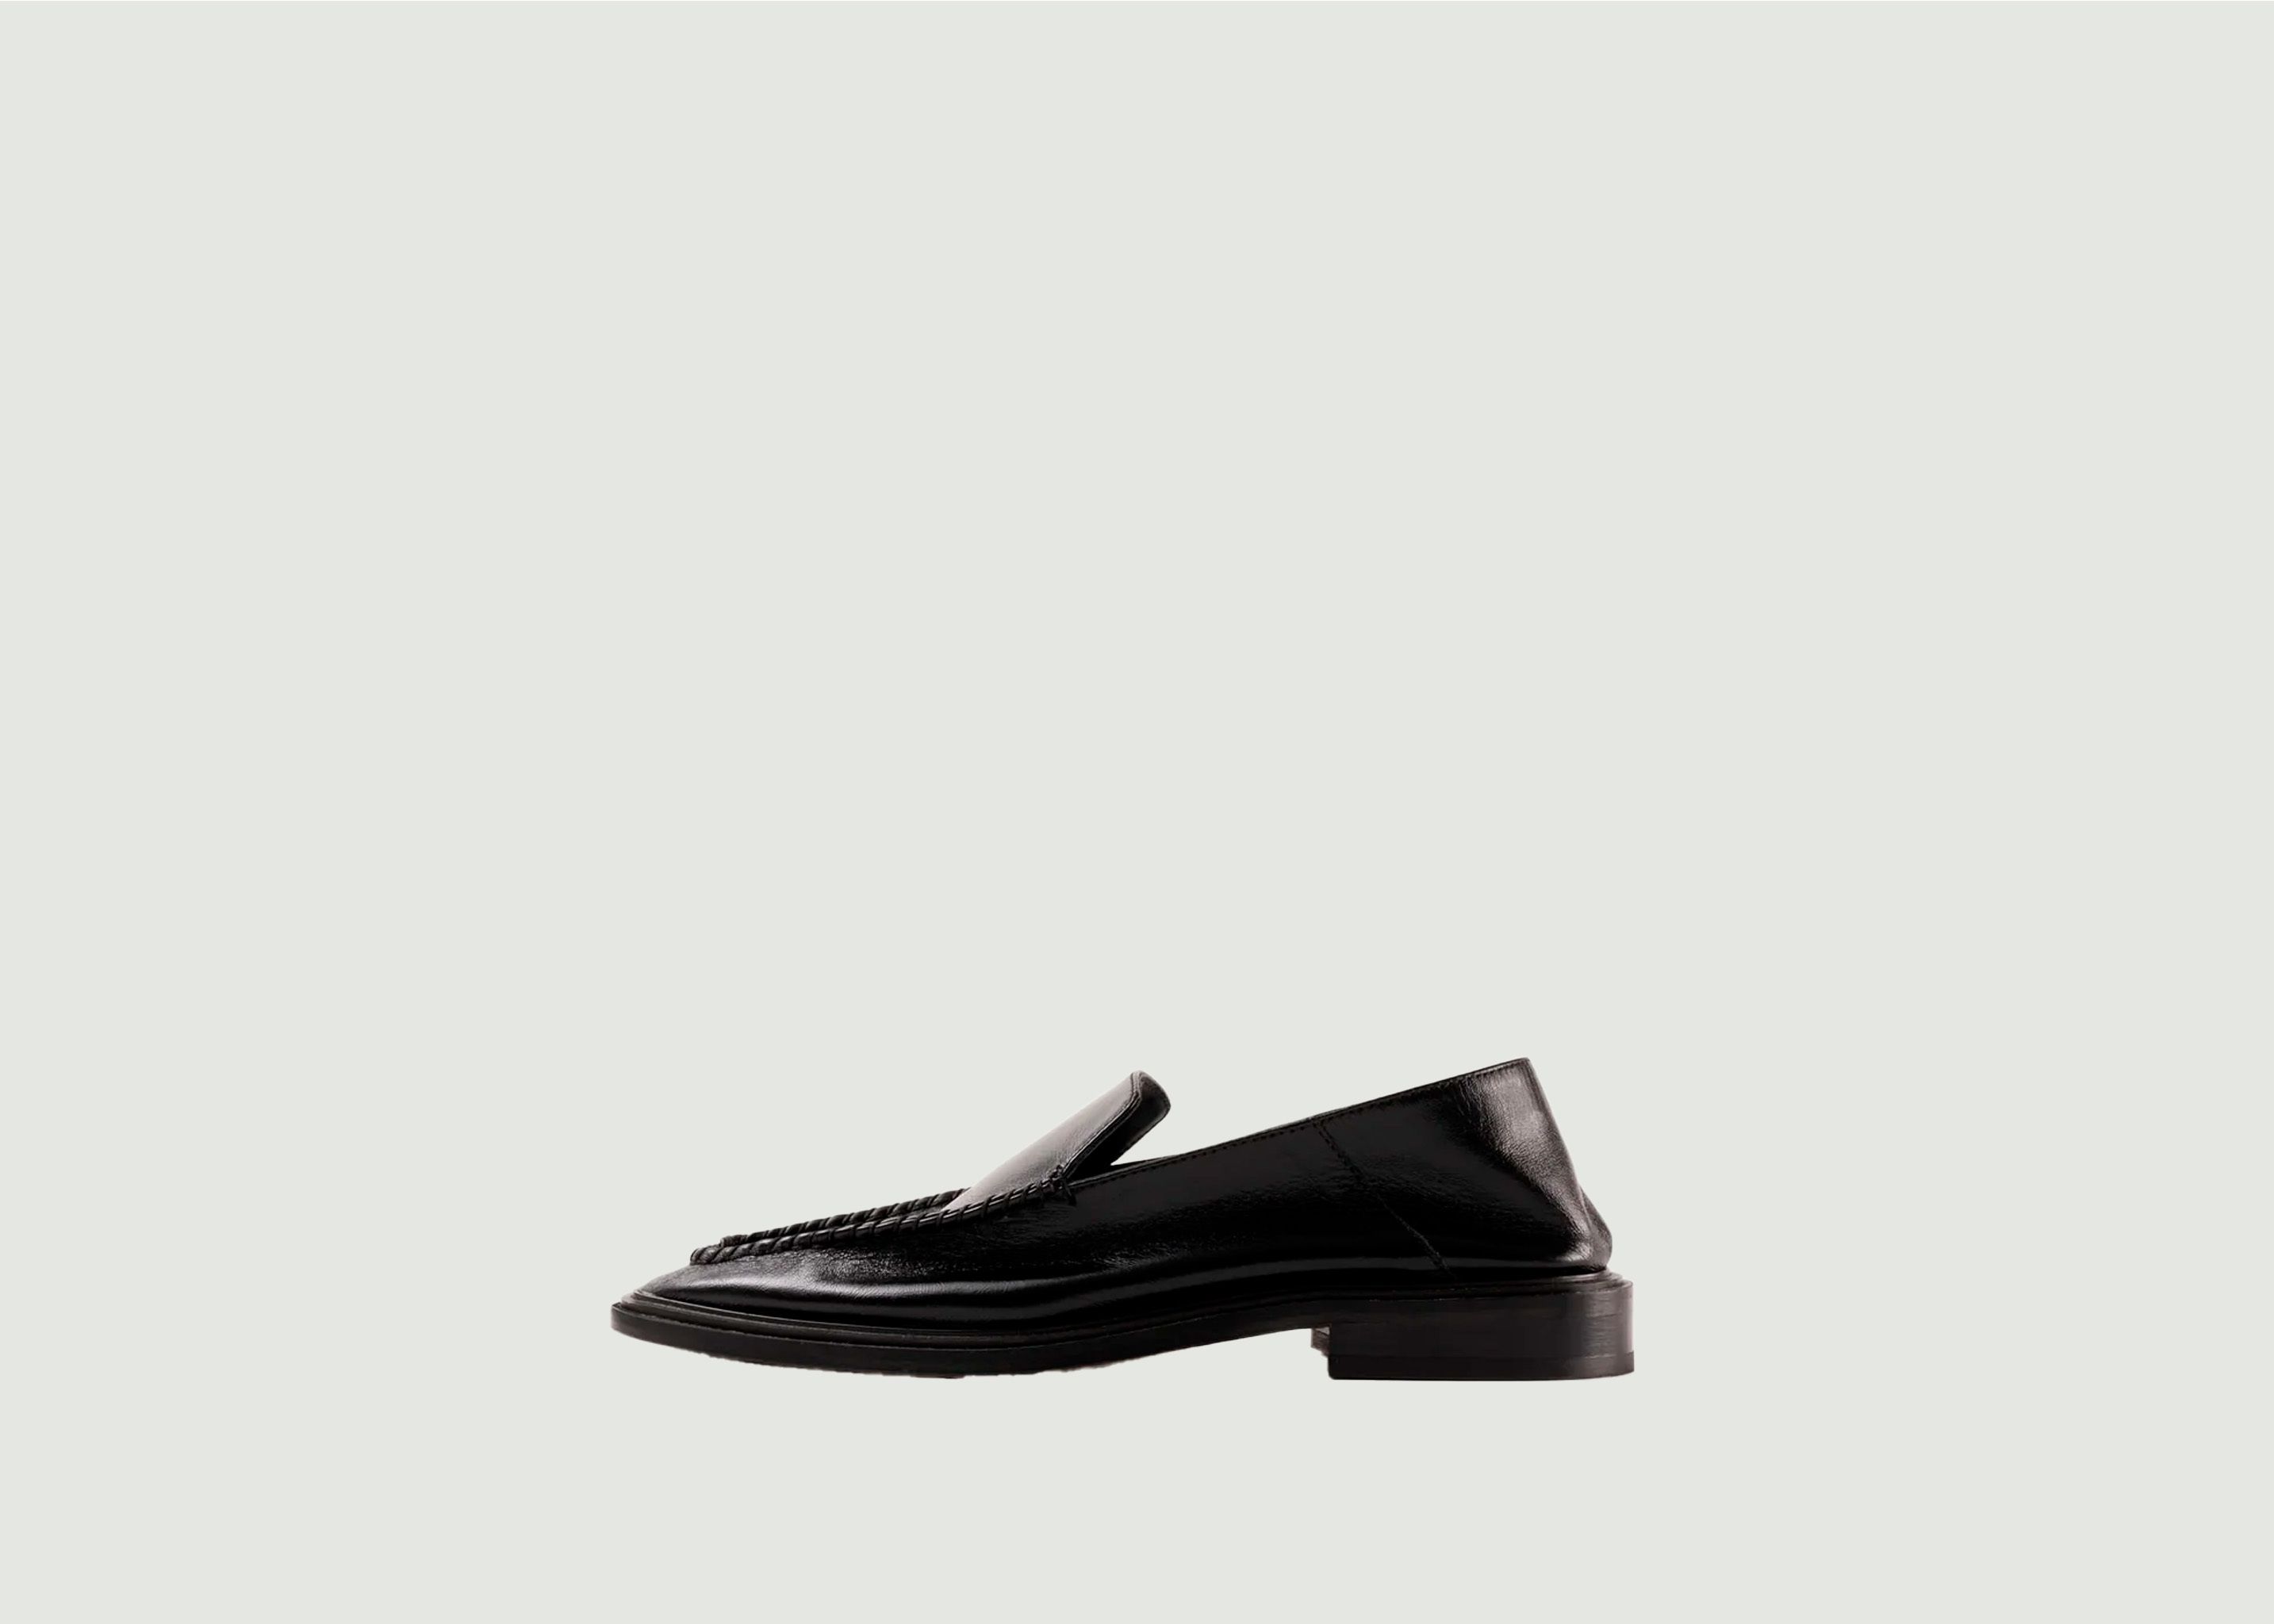 Rio polished leather loafers - Souliers Martinez